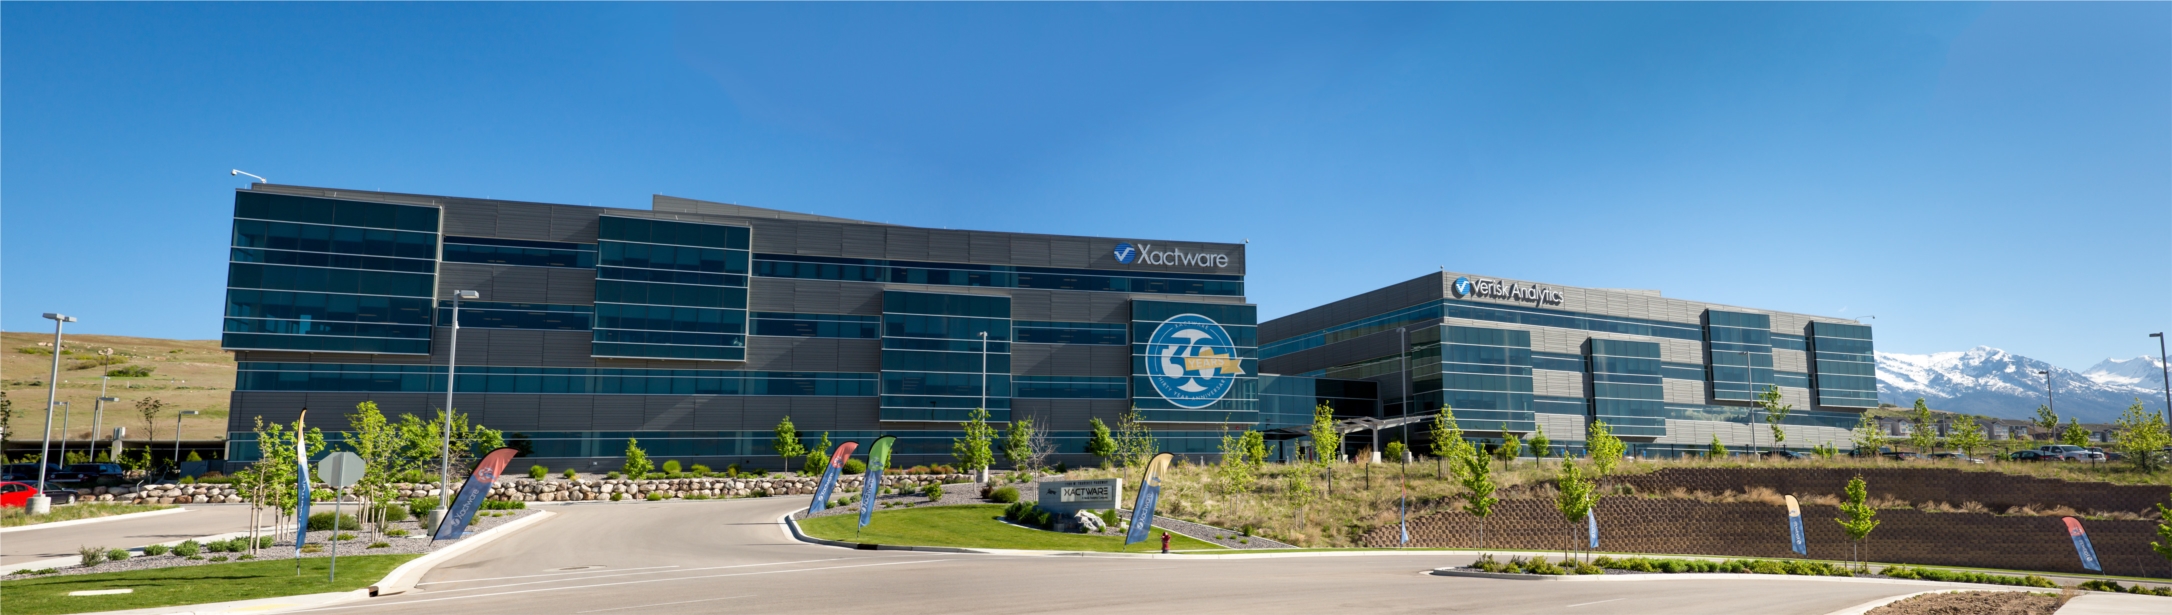 Xactware moved into its new Lehi corporate headquarters in 2013, and is currently celebrating it's 30th year.